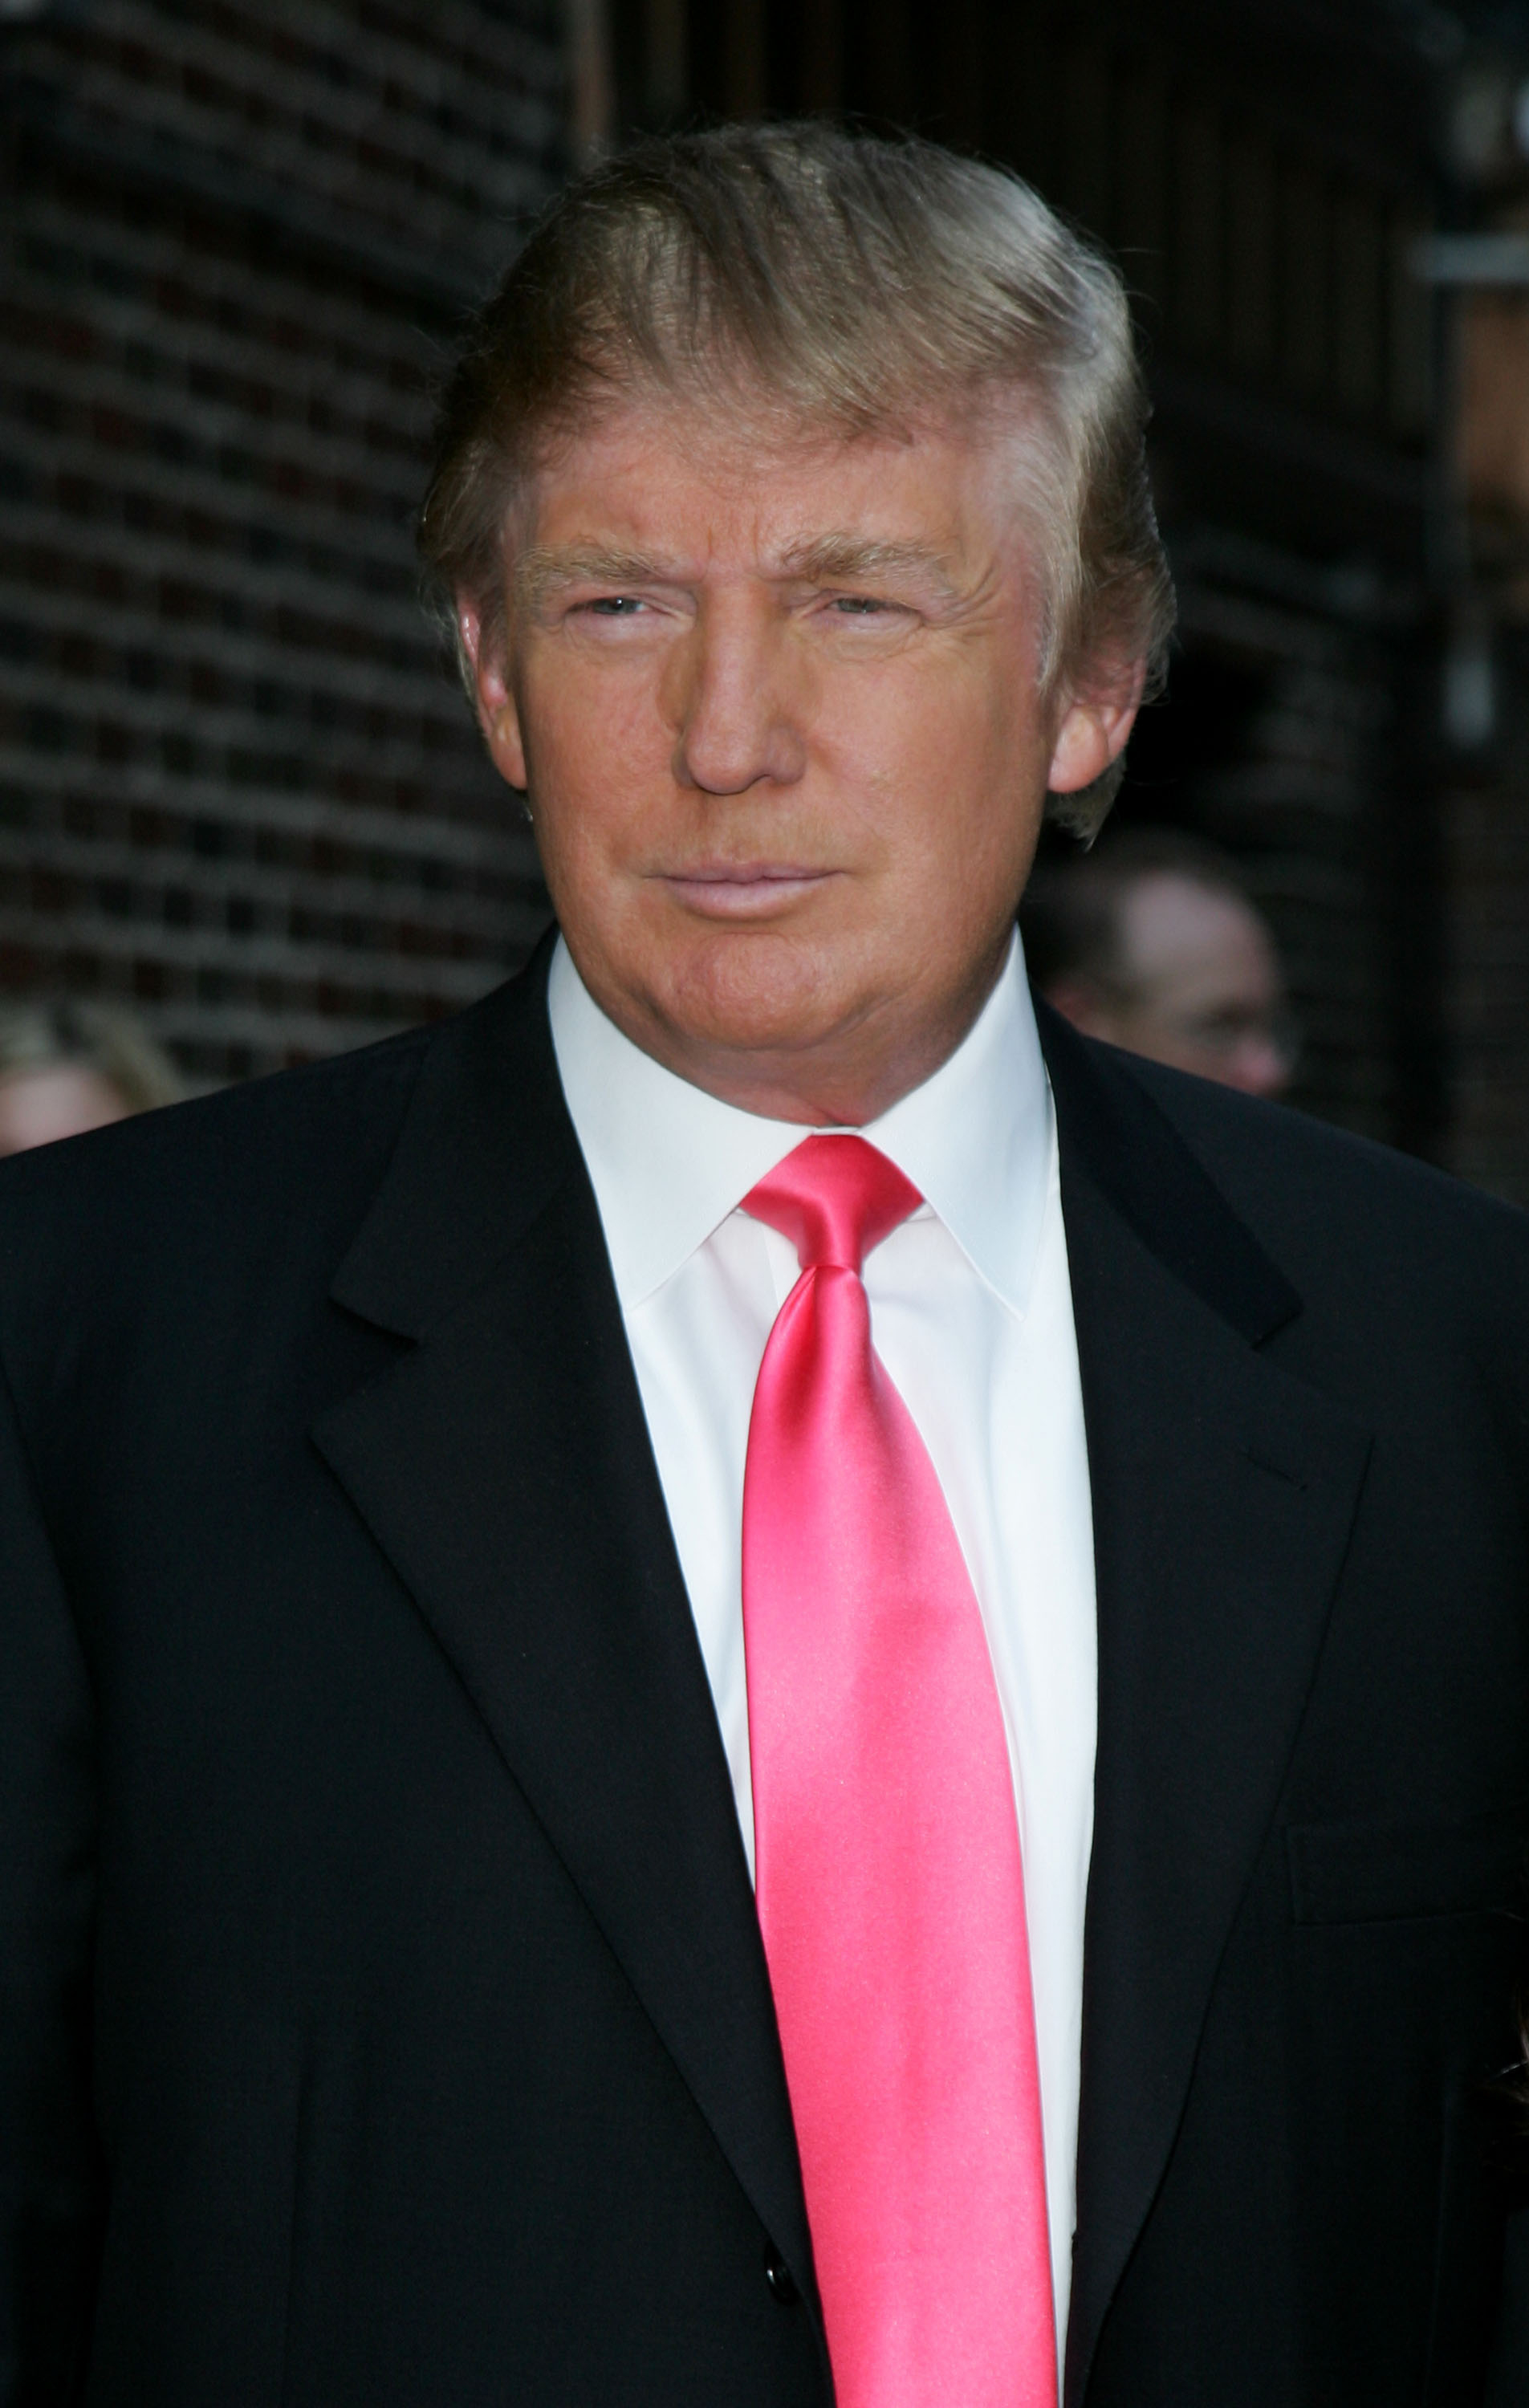 Close-up of Donald in a suit and tie